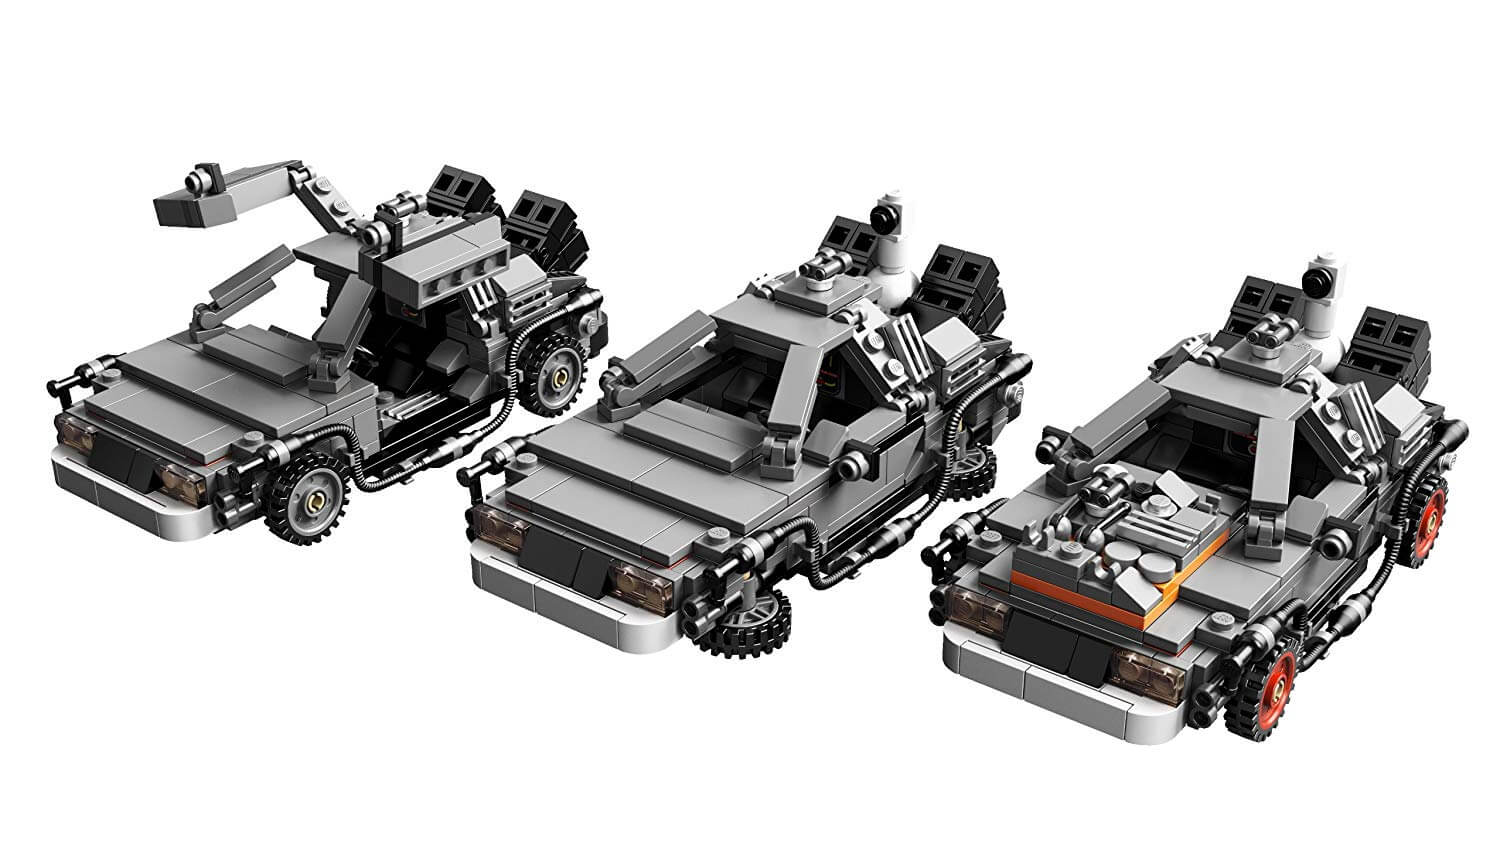 LEGO DeLorean Time Machine from 'Back to the Future'